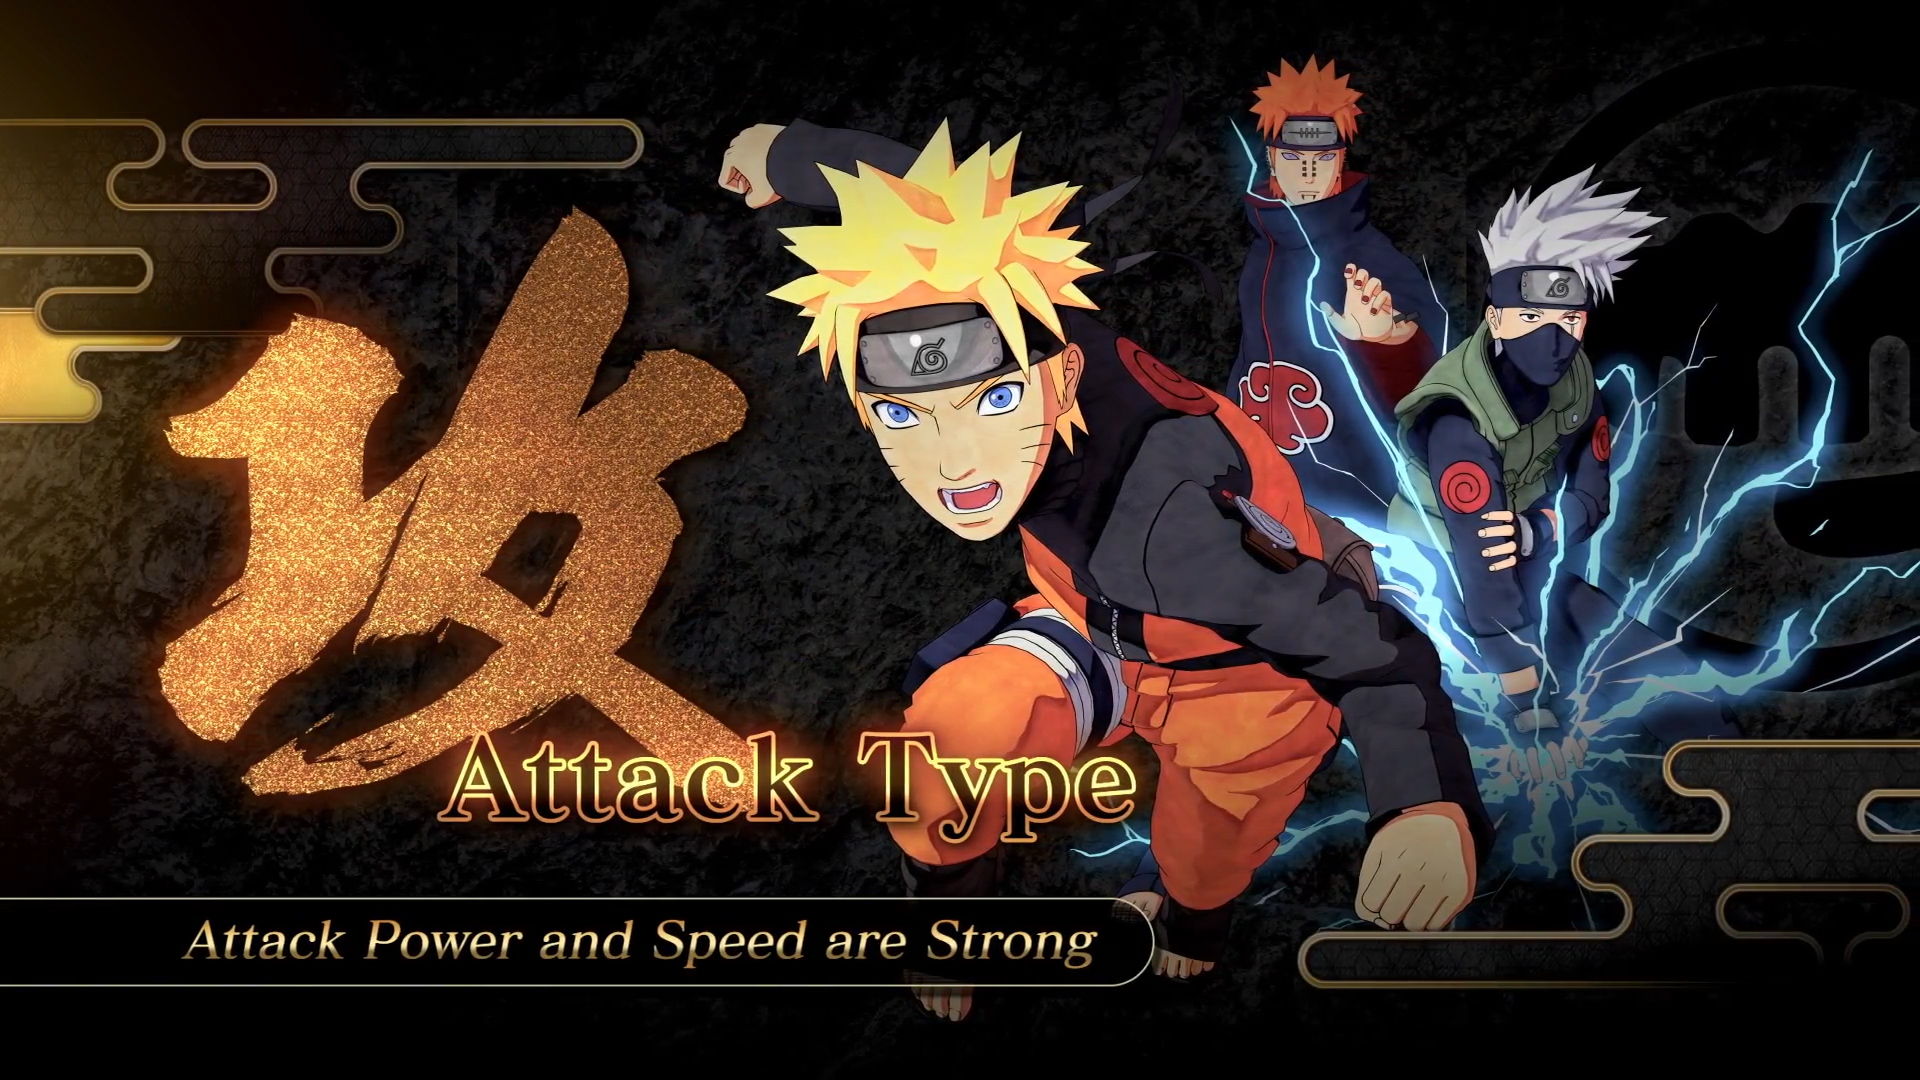 The New Naruto Game Is All About Class-Based Online Ninja Team Battles